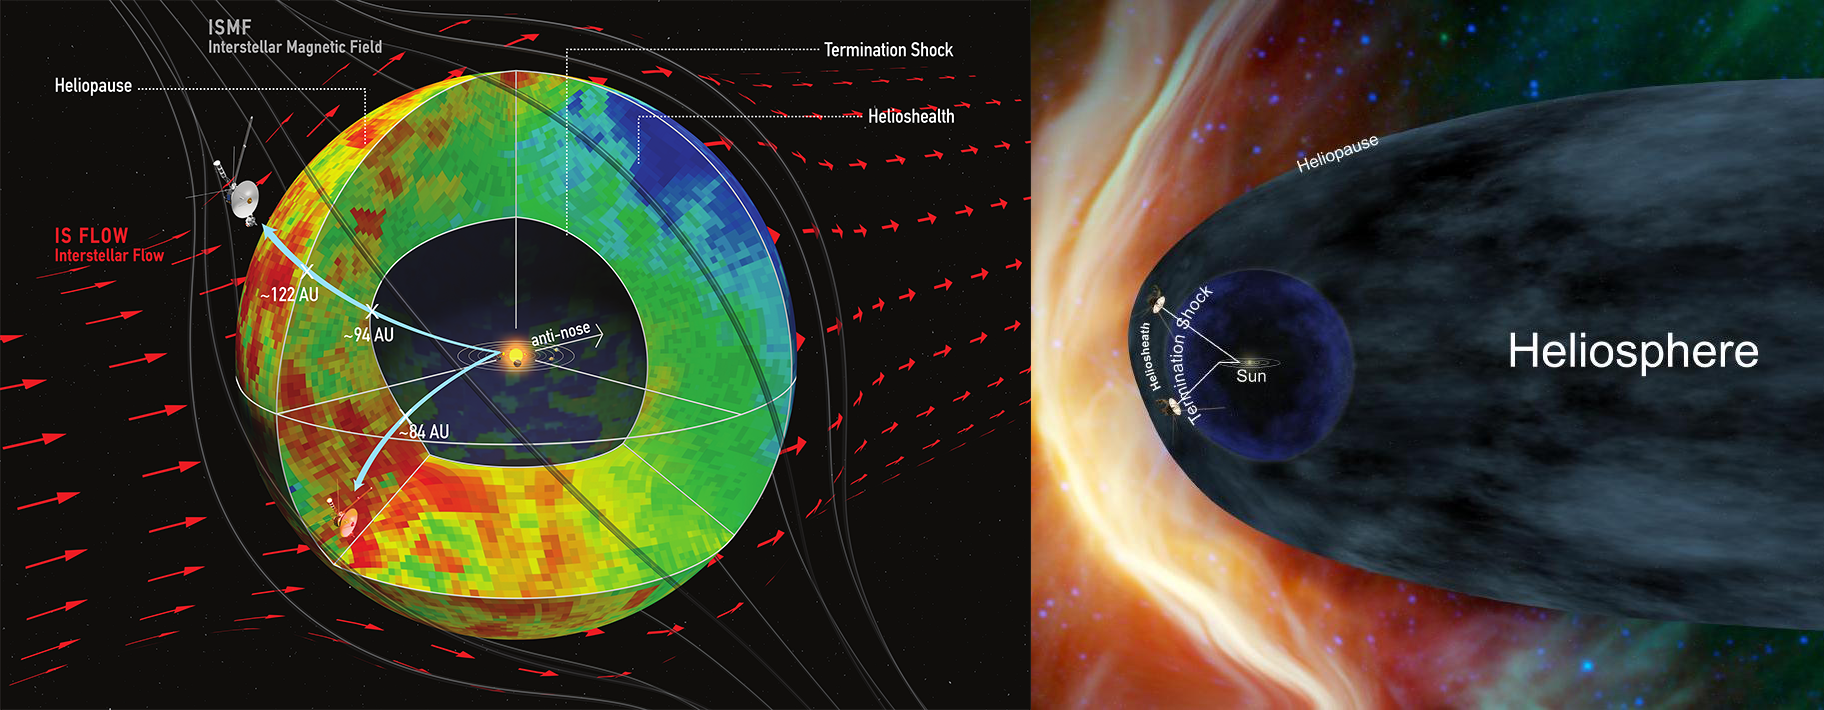 The image on the left shows a compact model of the heliosphere, supported by this latest data, while the image on the right shows an alternate model with an extended tail.